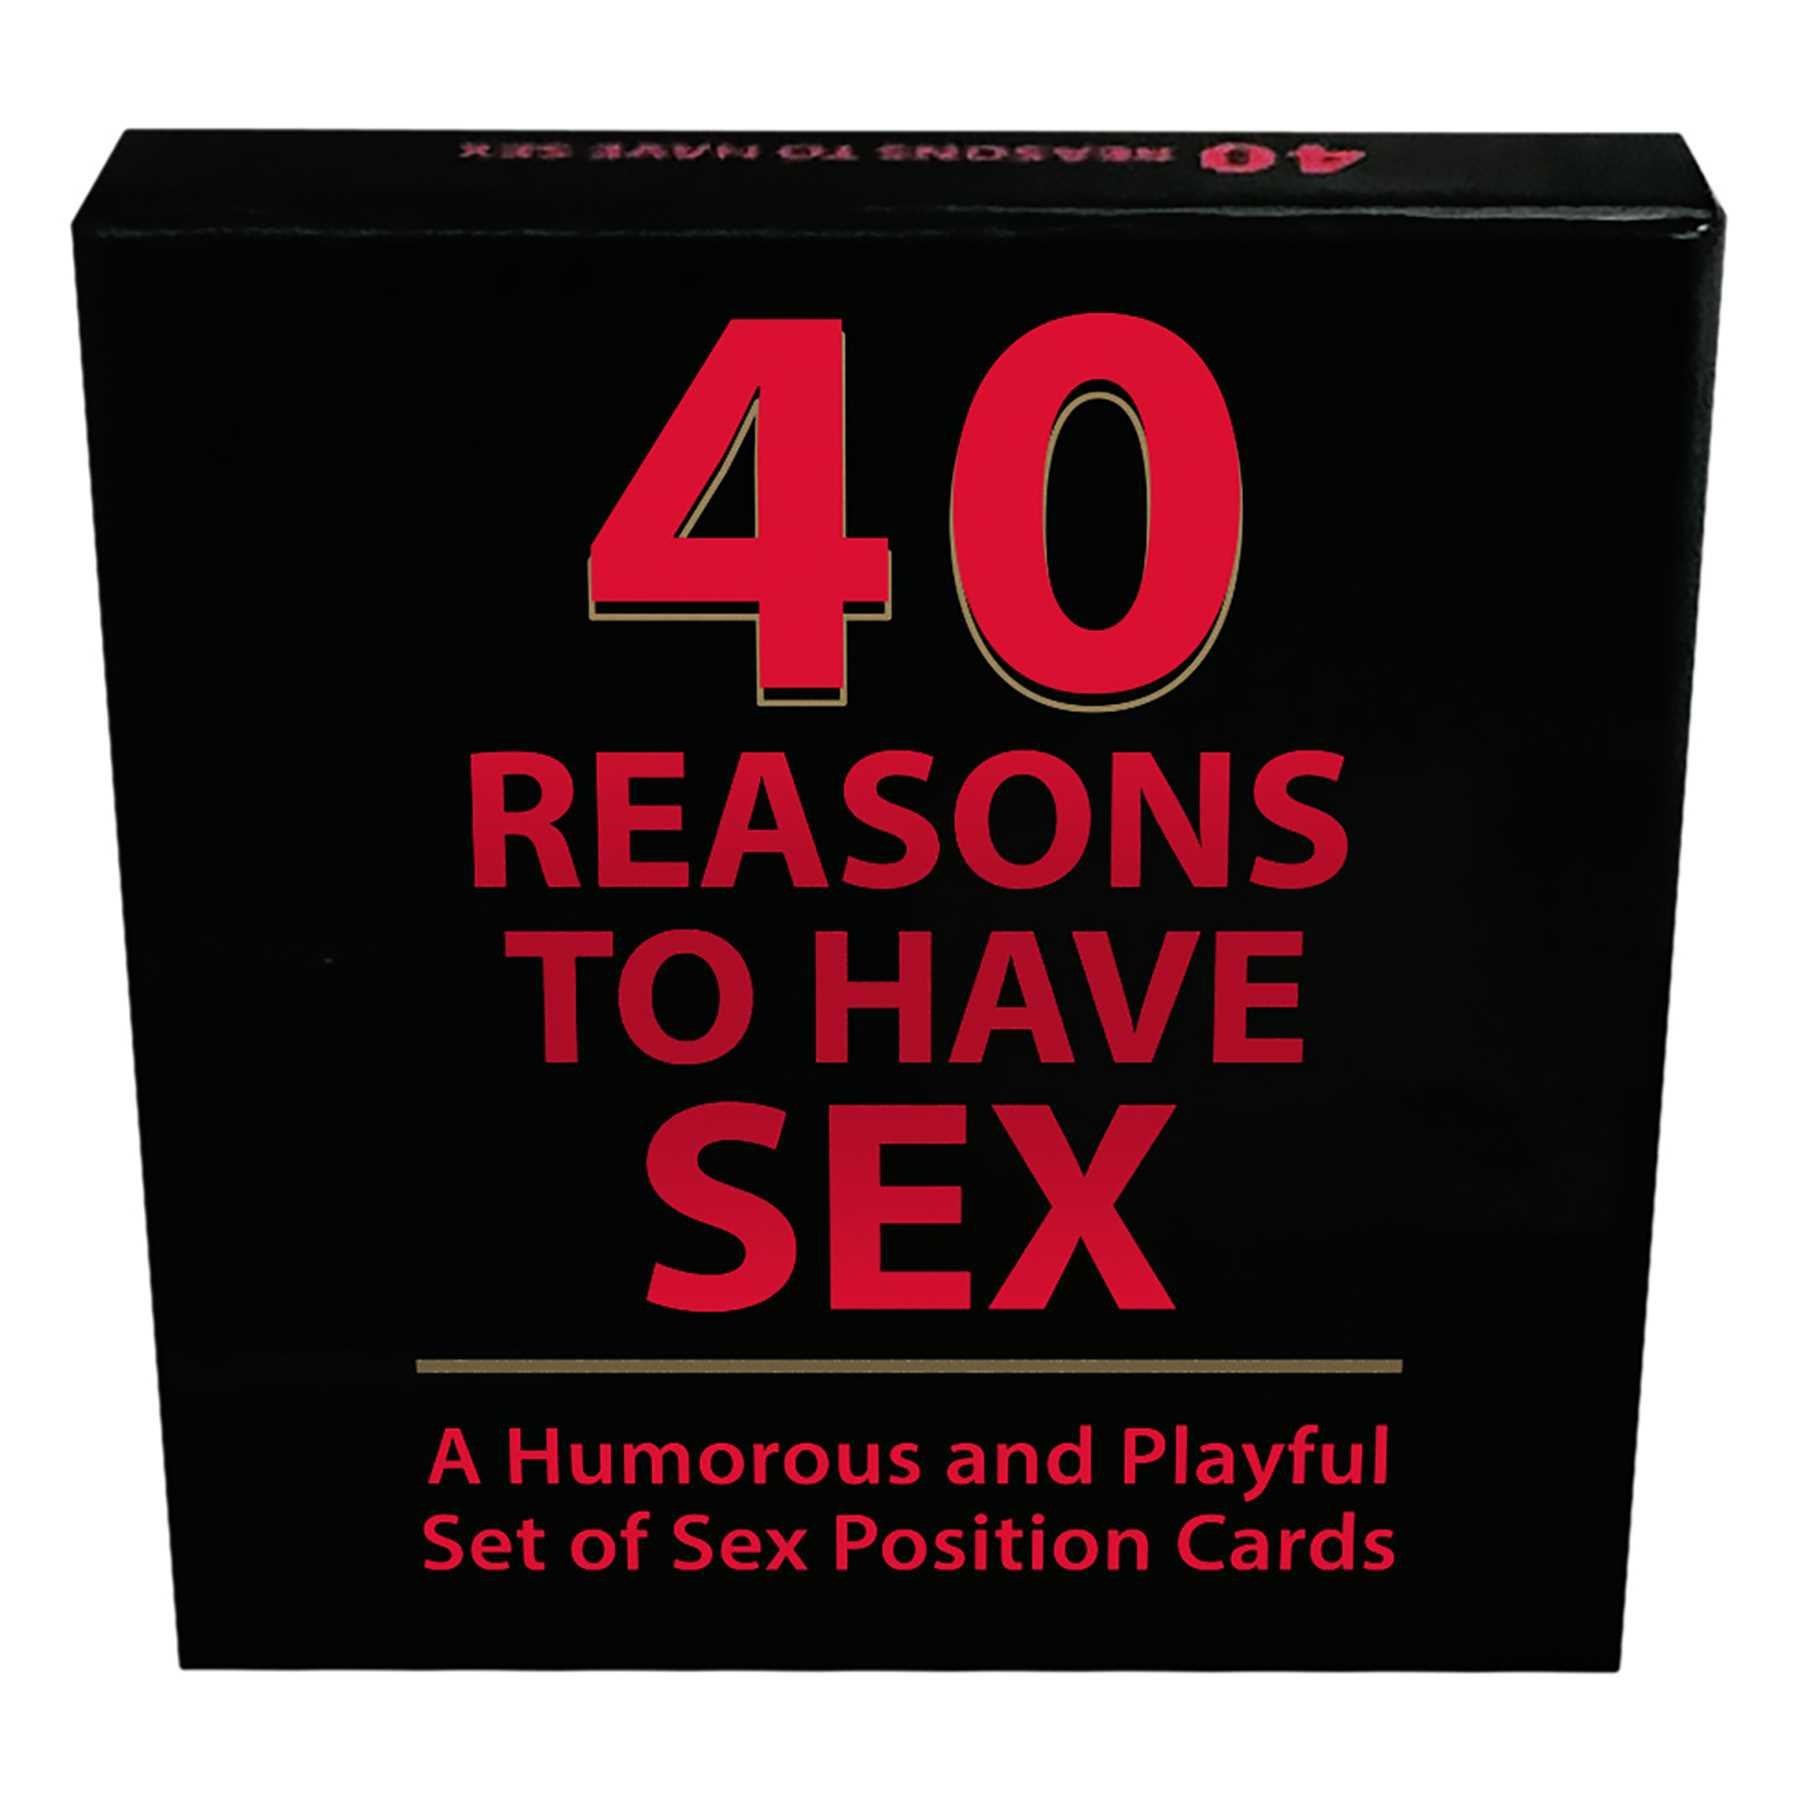 40 Reasons to have sex game outside of box